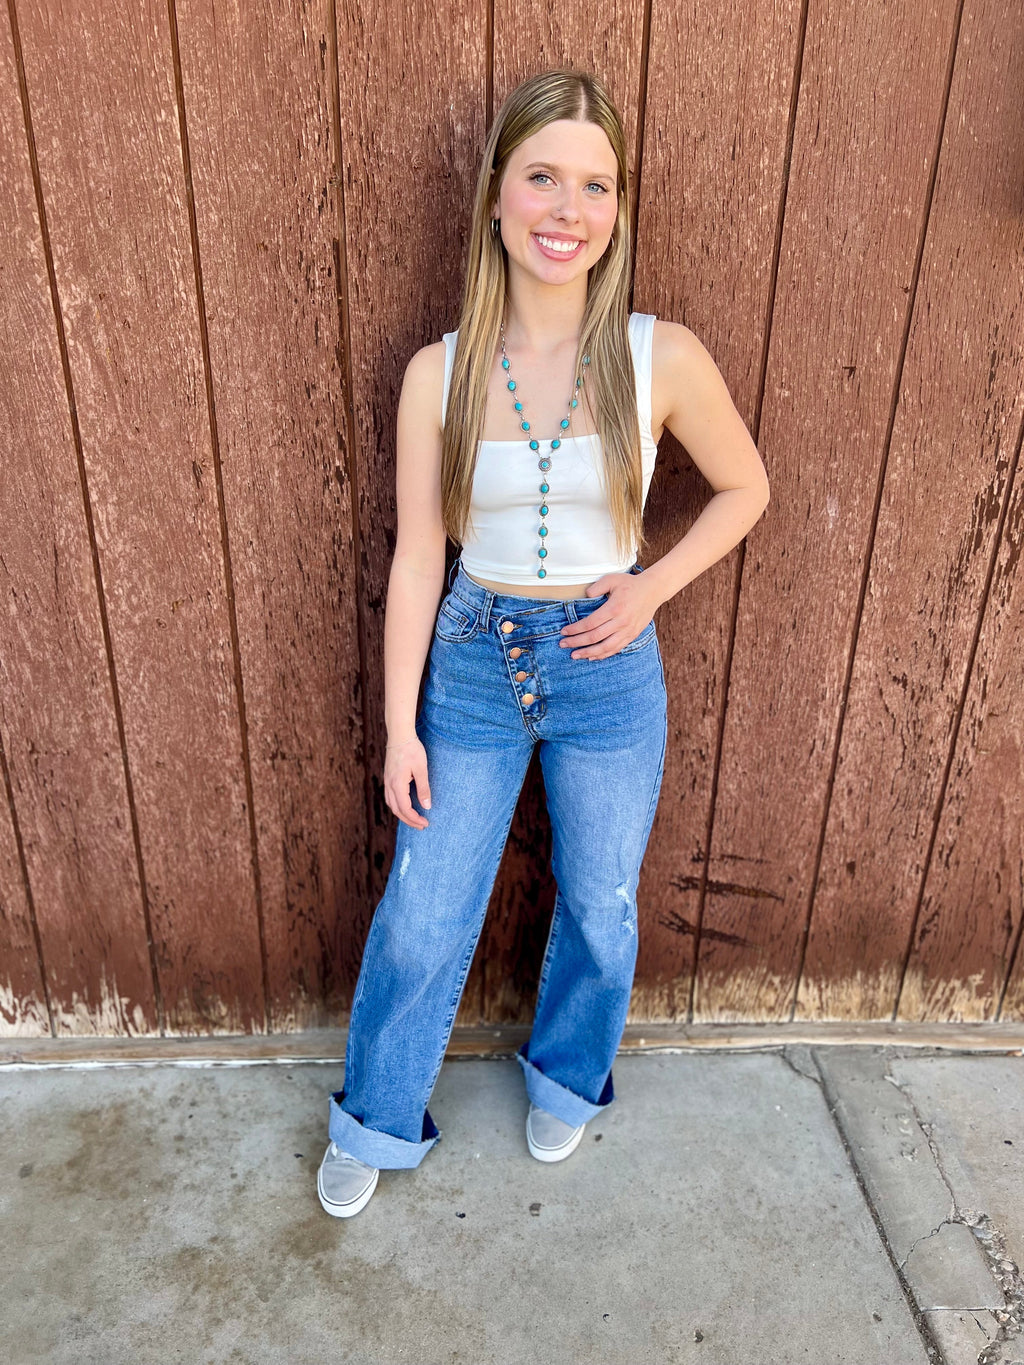 Criss cross waist jeans. Distressed Wide leg jeans. High waisted jeans. Button up straight leg jeans. High waisted medium wash jeans. Medium wash wide leg jeans. Women's western boutique. Women's western wear. Women's western fashion. Small business. Woman owned. Trending fashion.